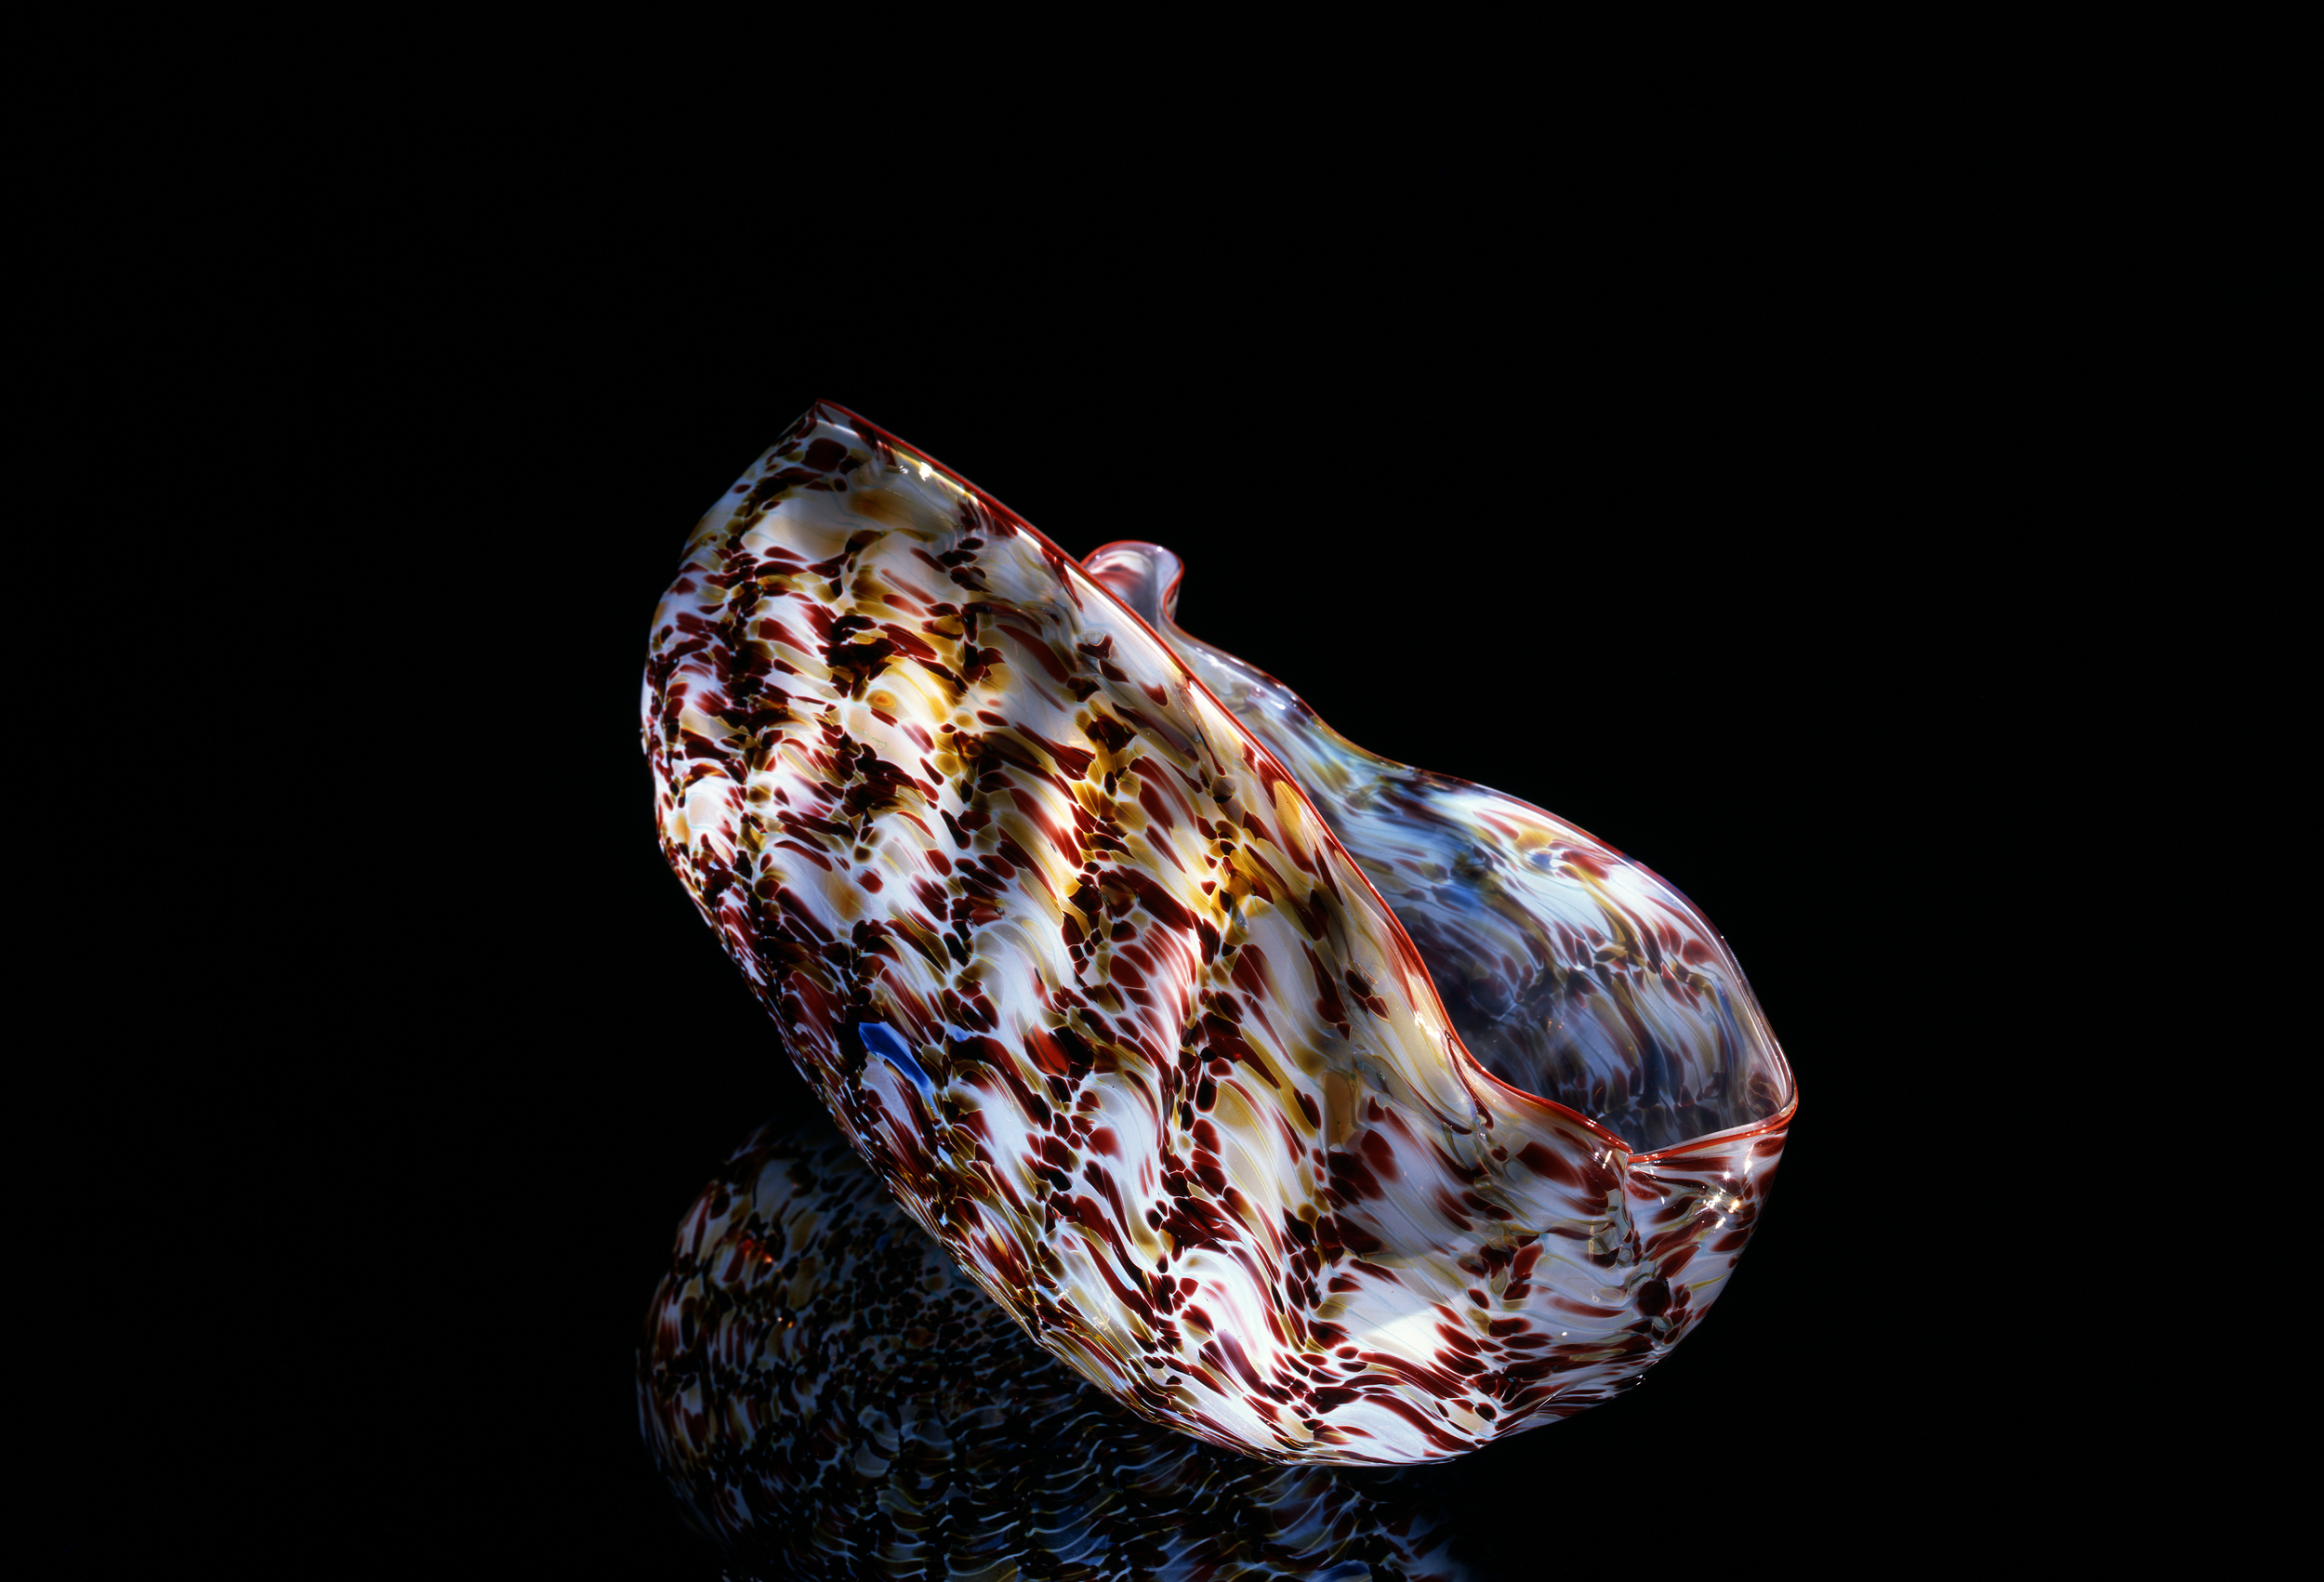  Dale Chihuly,&nbsp; Davy's Gray Macchia with Crimson Lip Wrap&nbsp; (1981, glass, 7 x 13 x 5&nbsp;inches), DC.96 